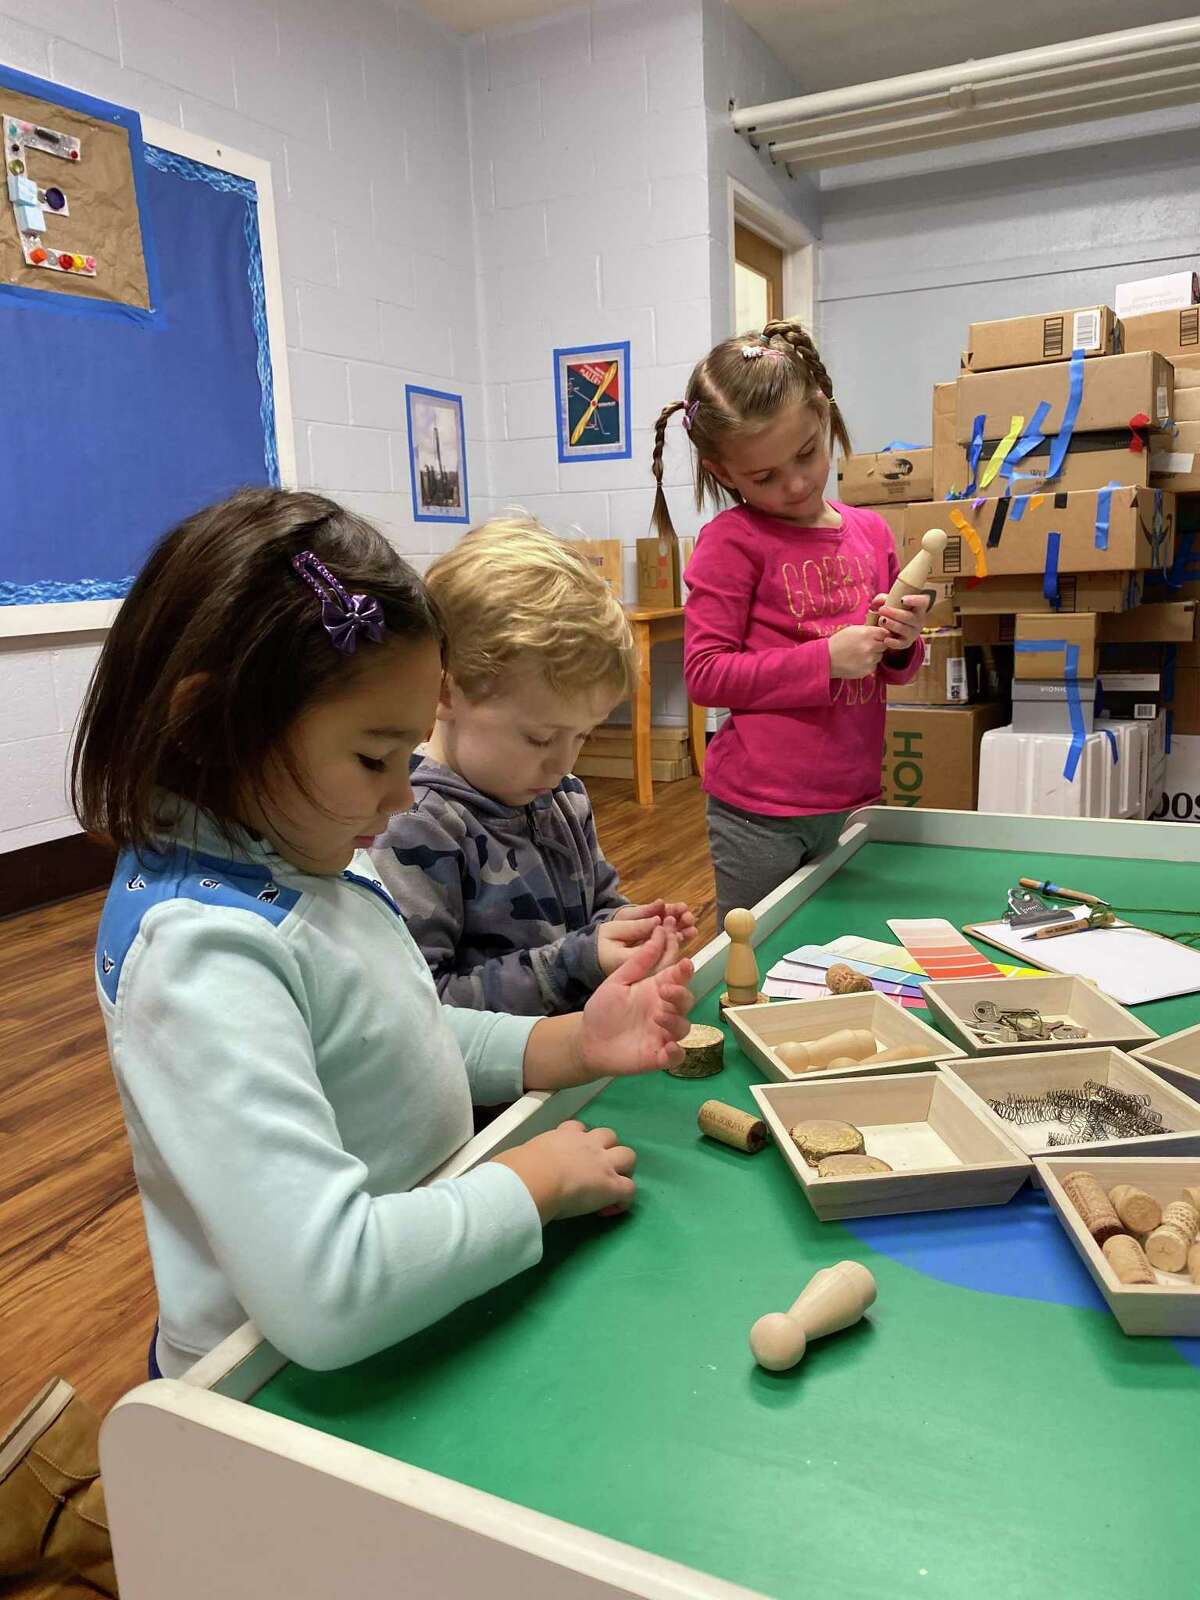 The United Methodist Preschool, (UMPS), has announced its newly completed Makerspace.